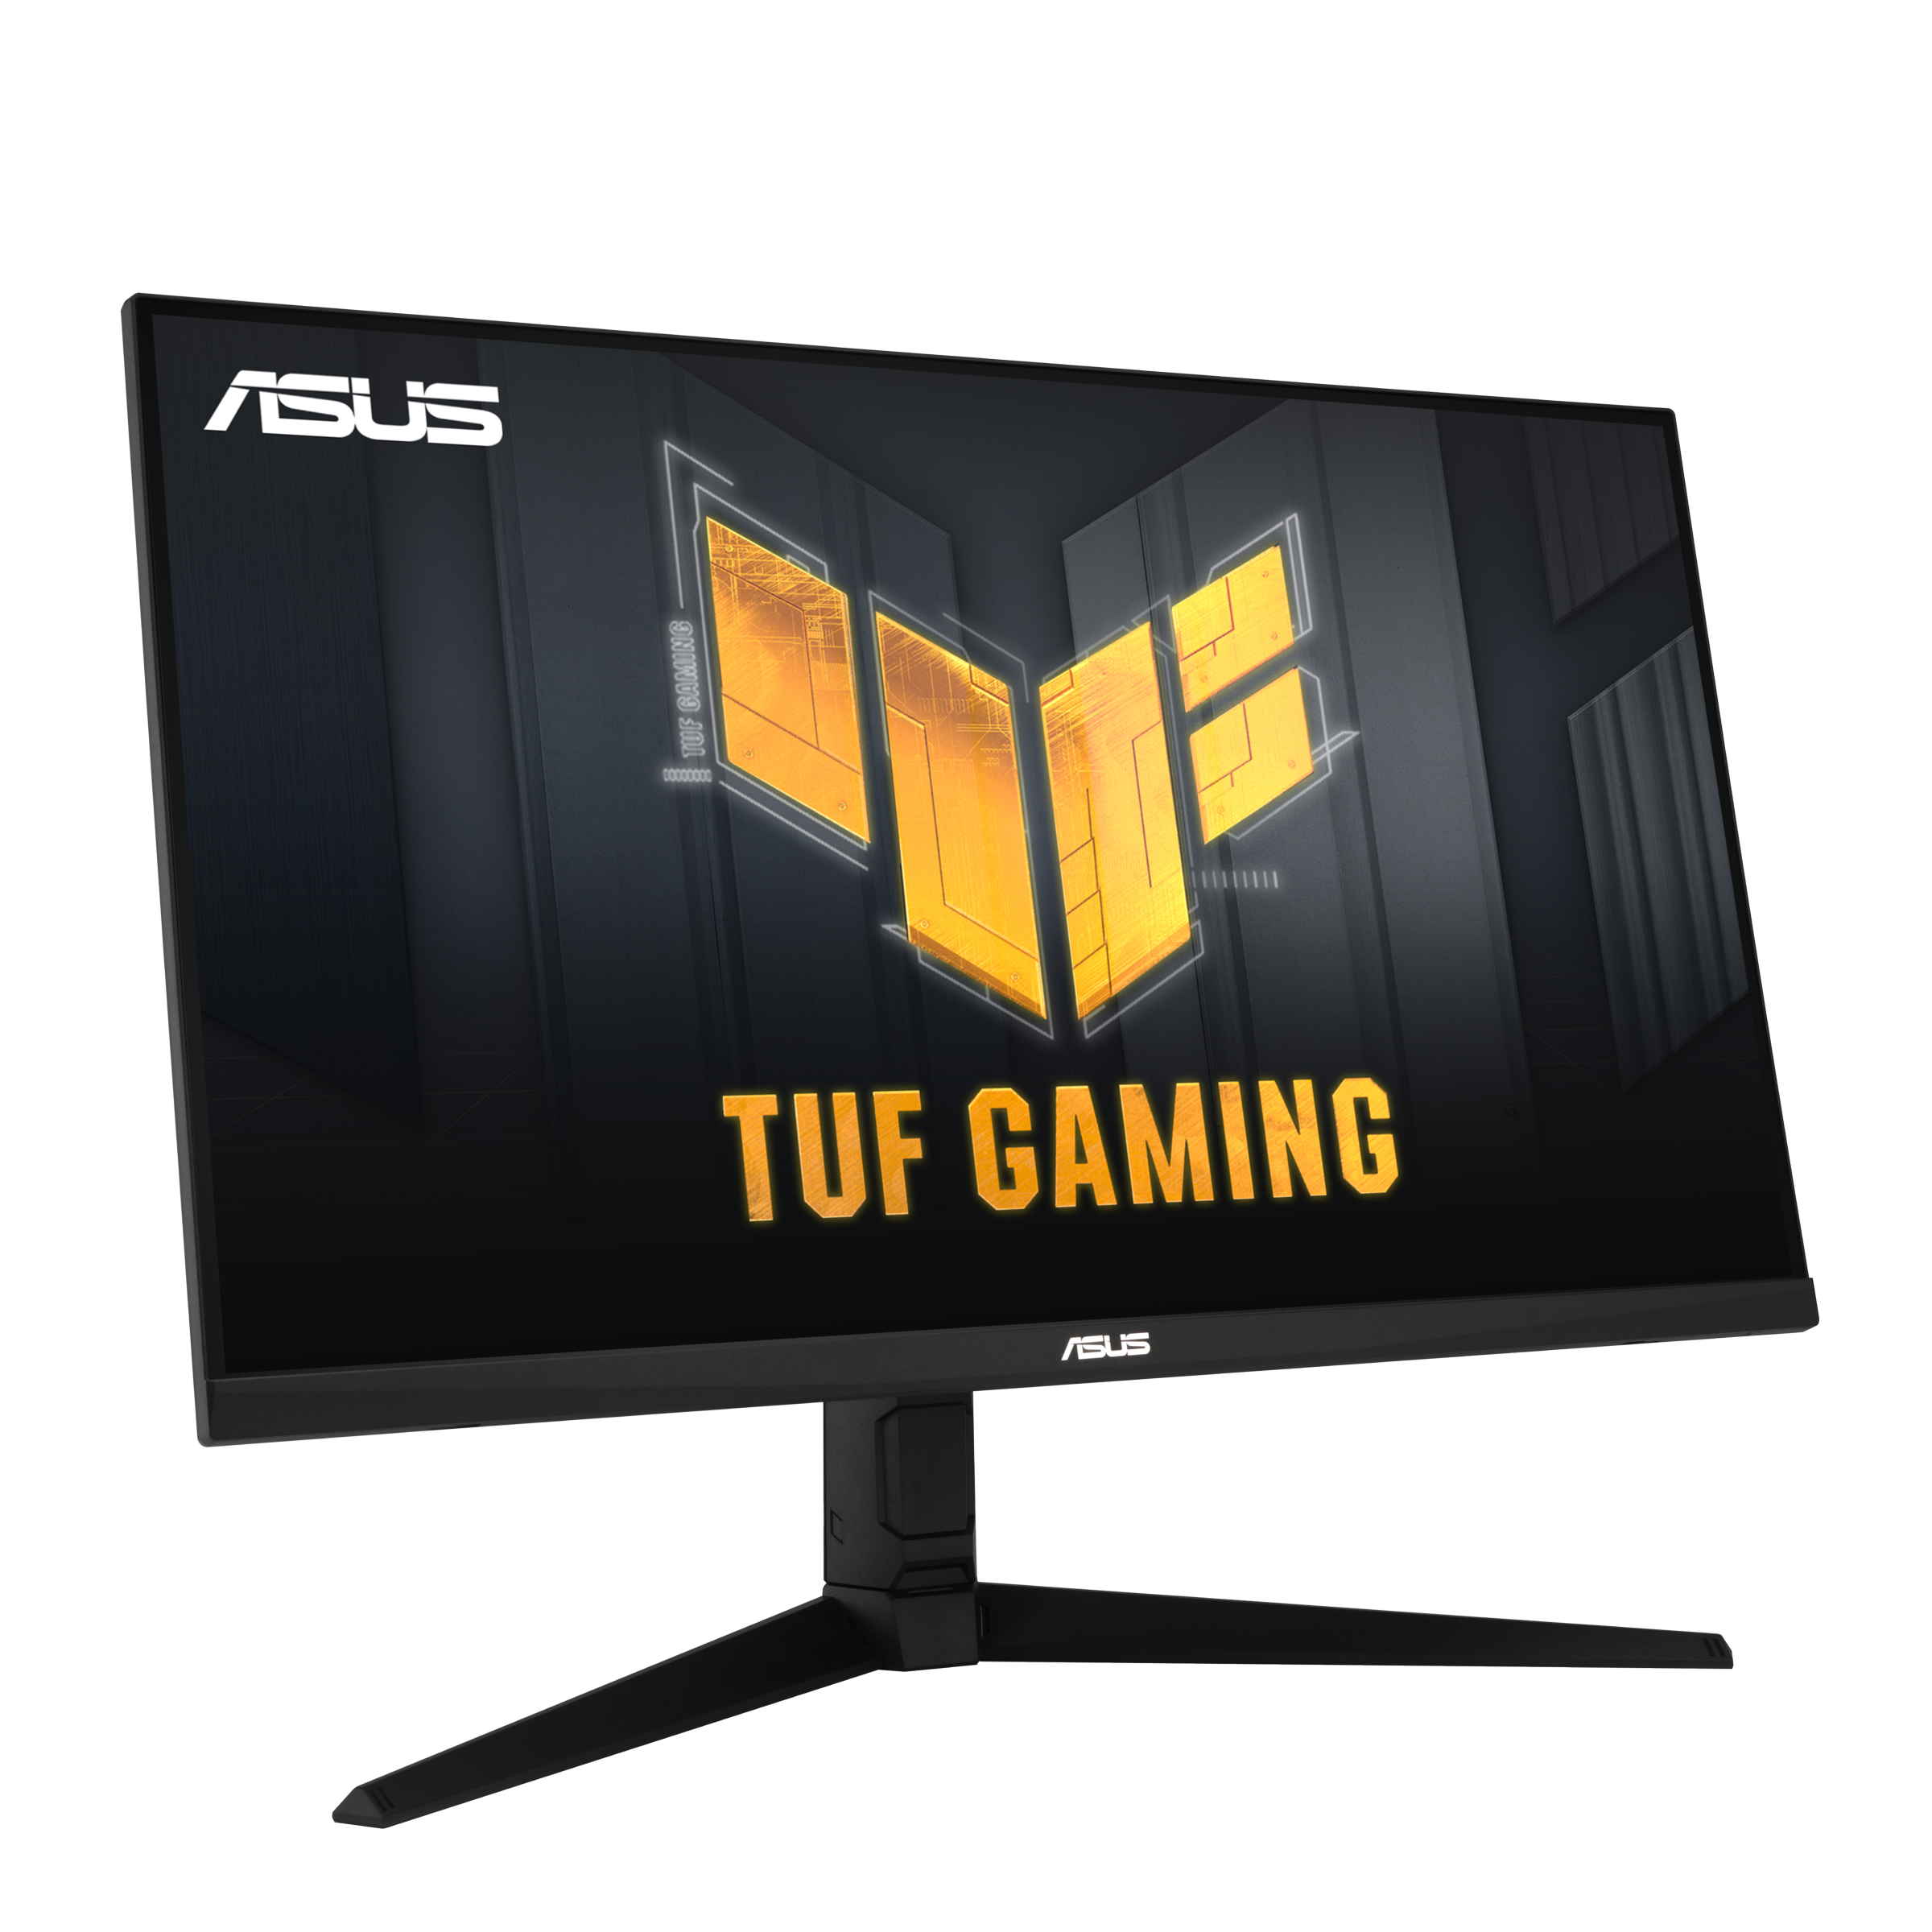 Media asset in full size related to 3dfxzone.it news item entitled as follows: ASUS introduce il monitor TUF Gaming VG32AQL1A con pannello IPS QHD da 1ms | Image Name: news32277_ASUS-TUF-Gaming-VG32AQL1A_3.png